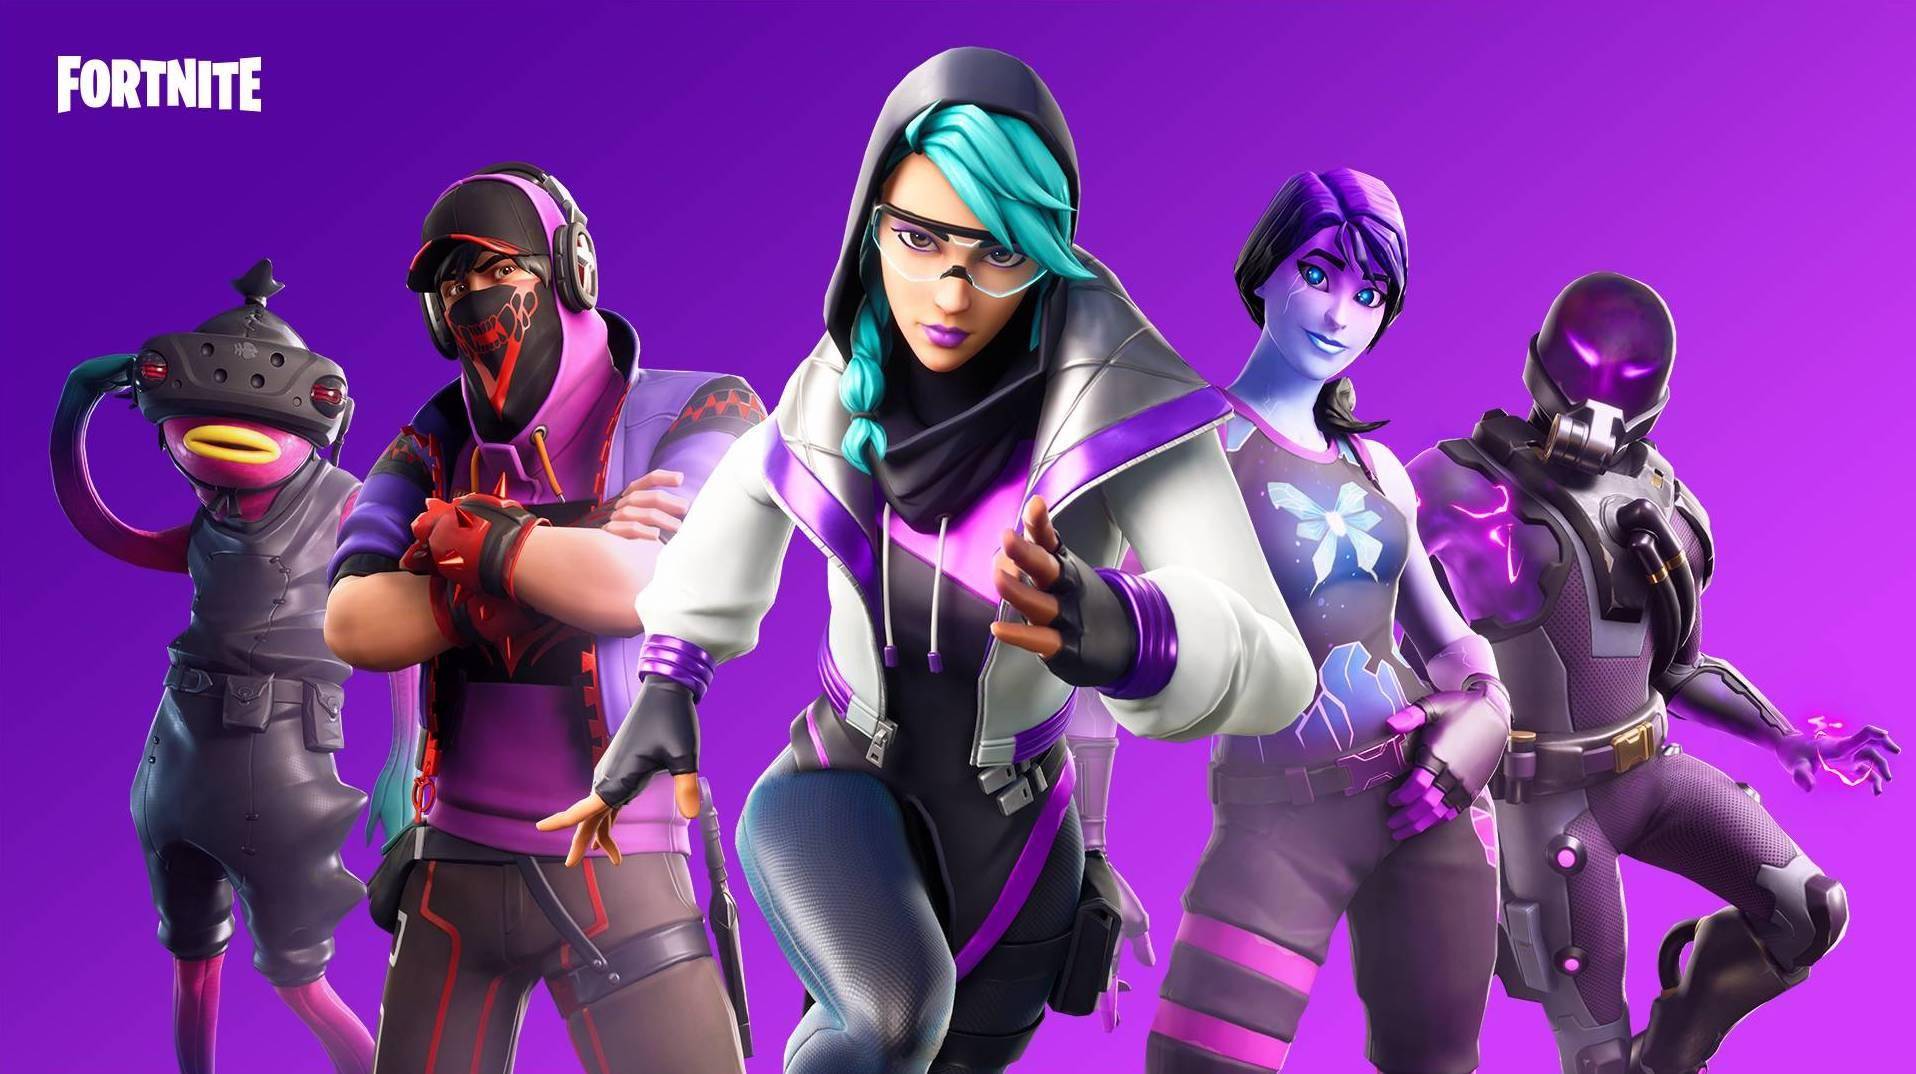 Fortnite changes matchmaking and adds bots